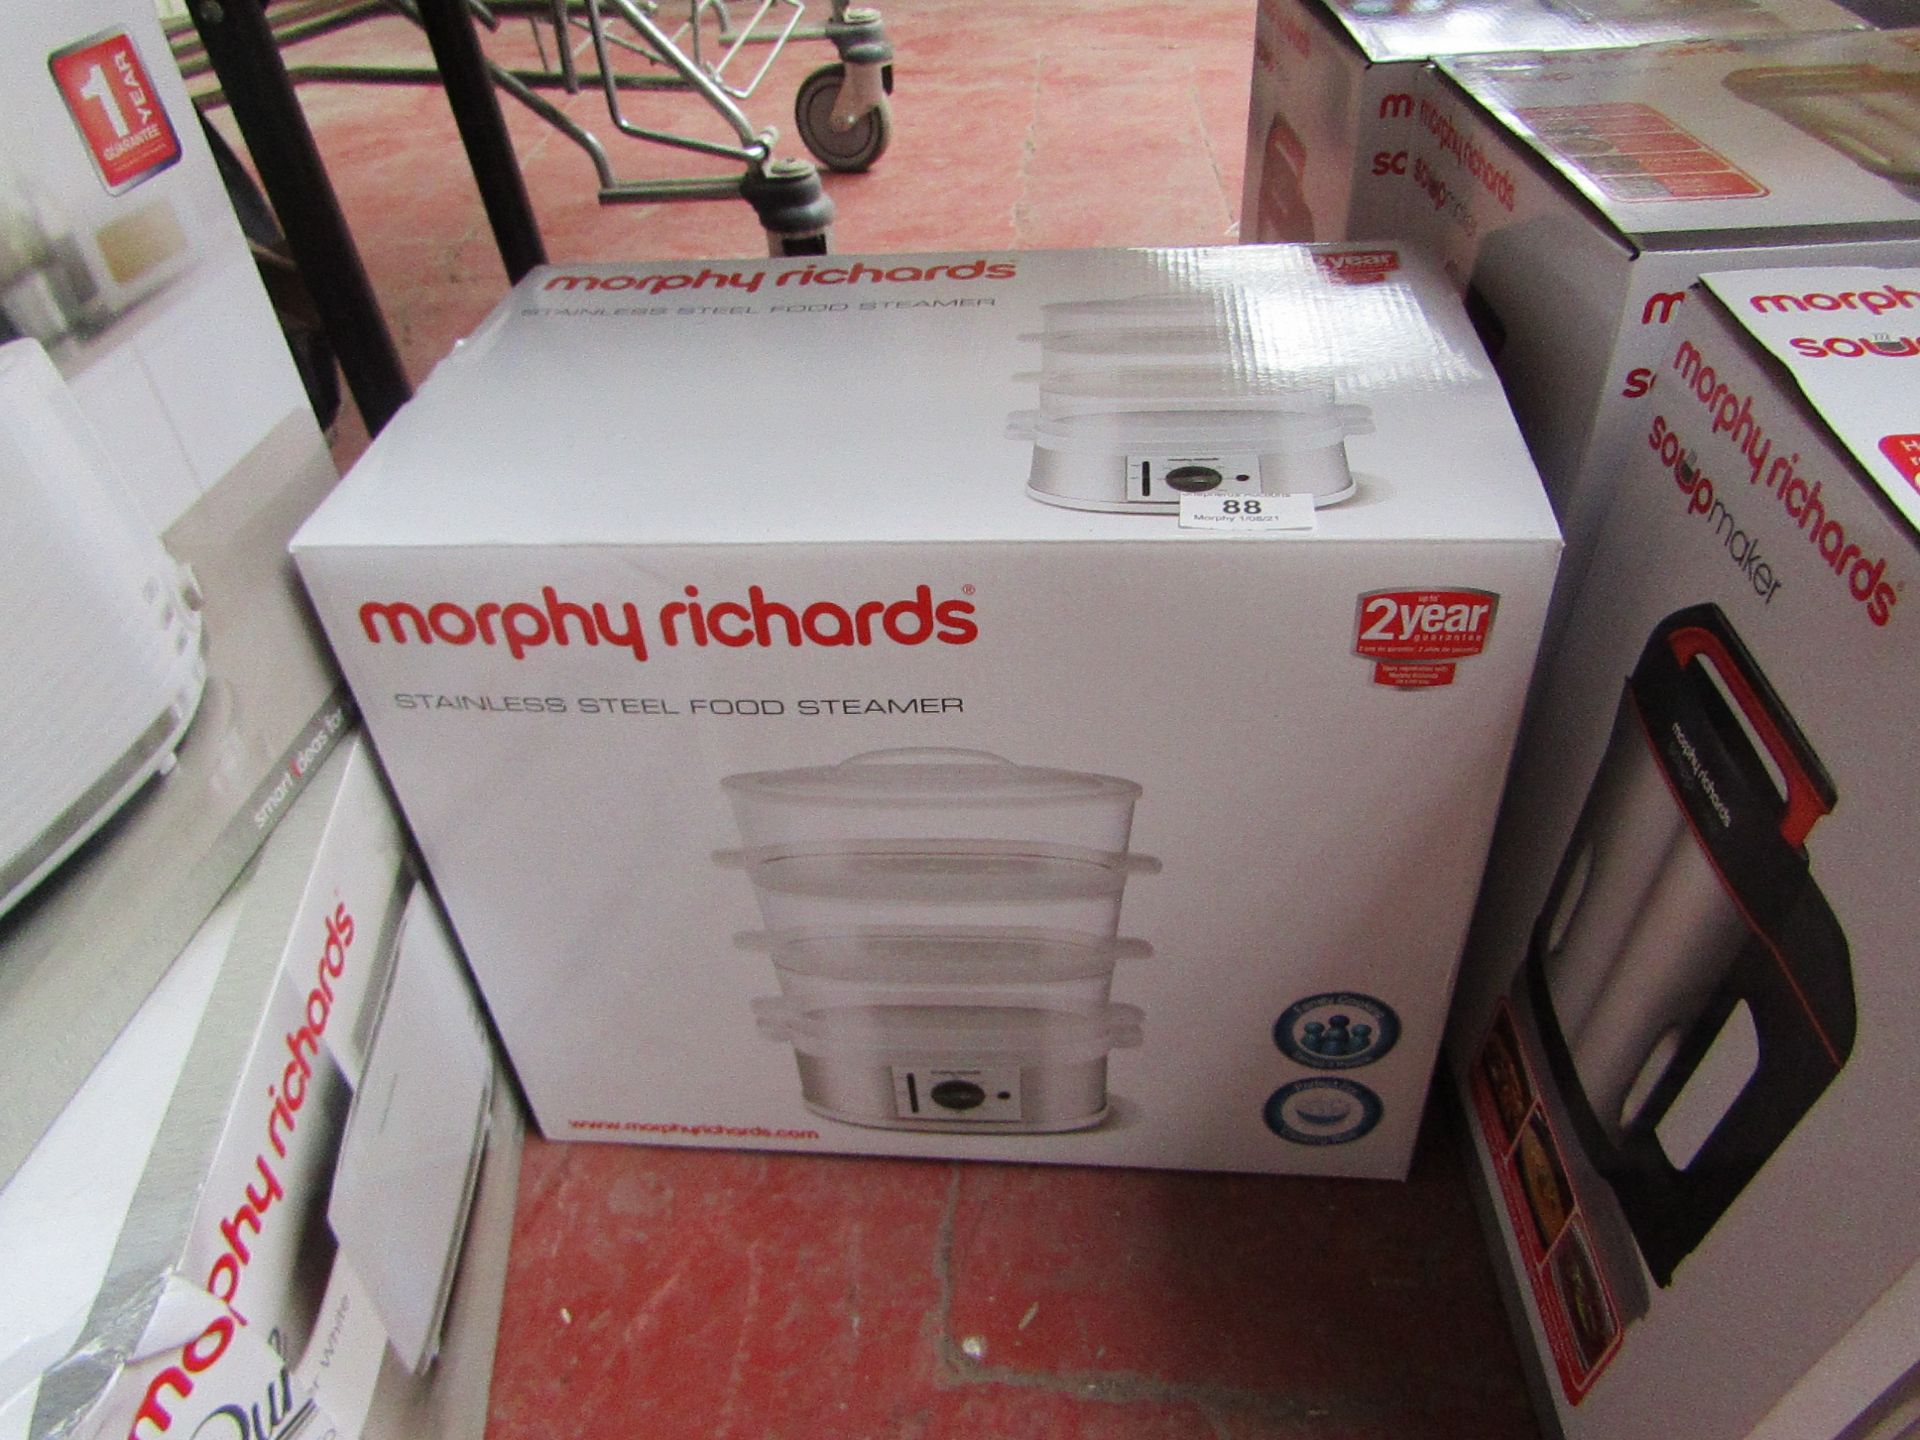 Morphy Richards stainless steel food steamer, brand new and boxed. RRP £34.99